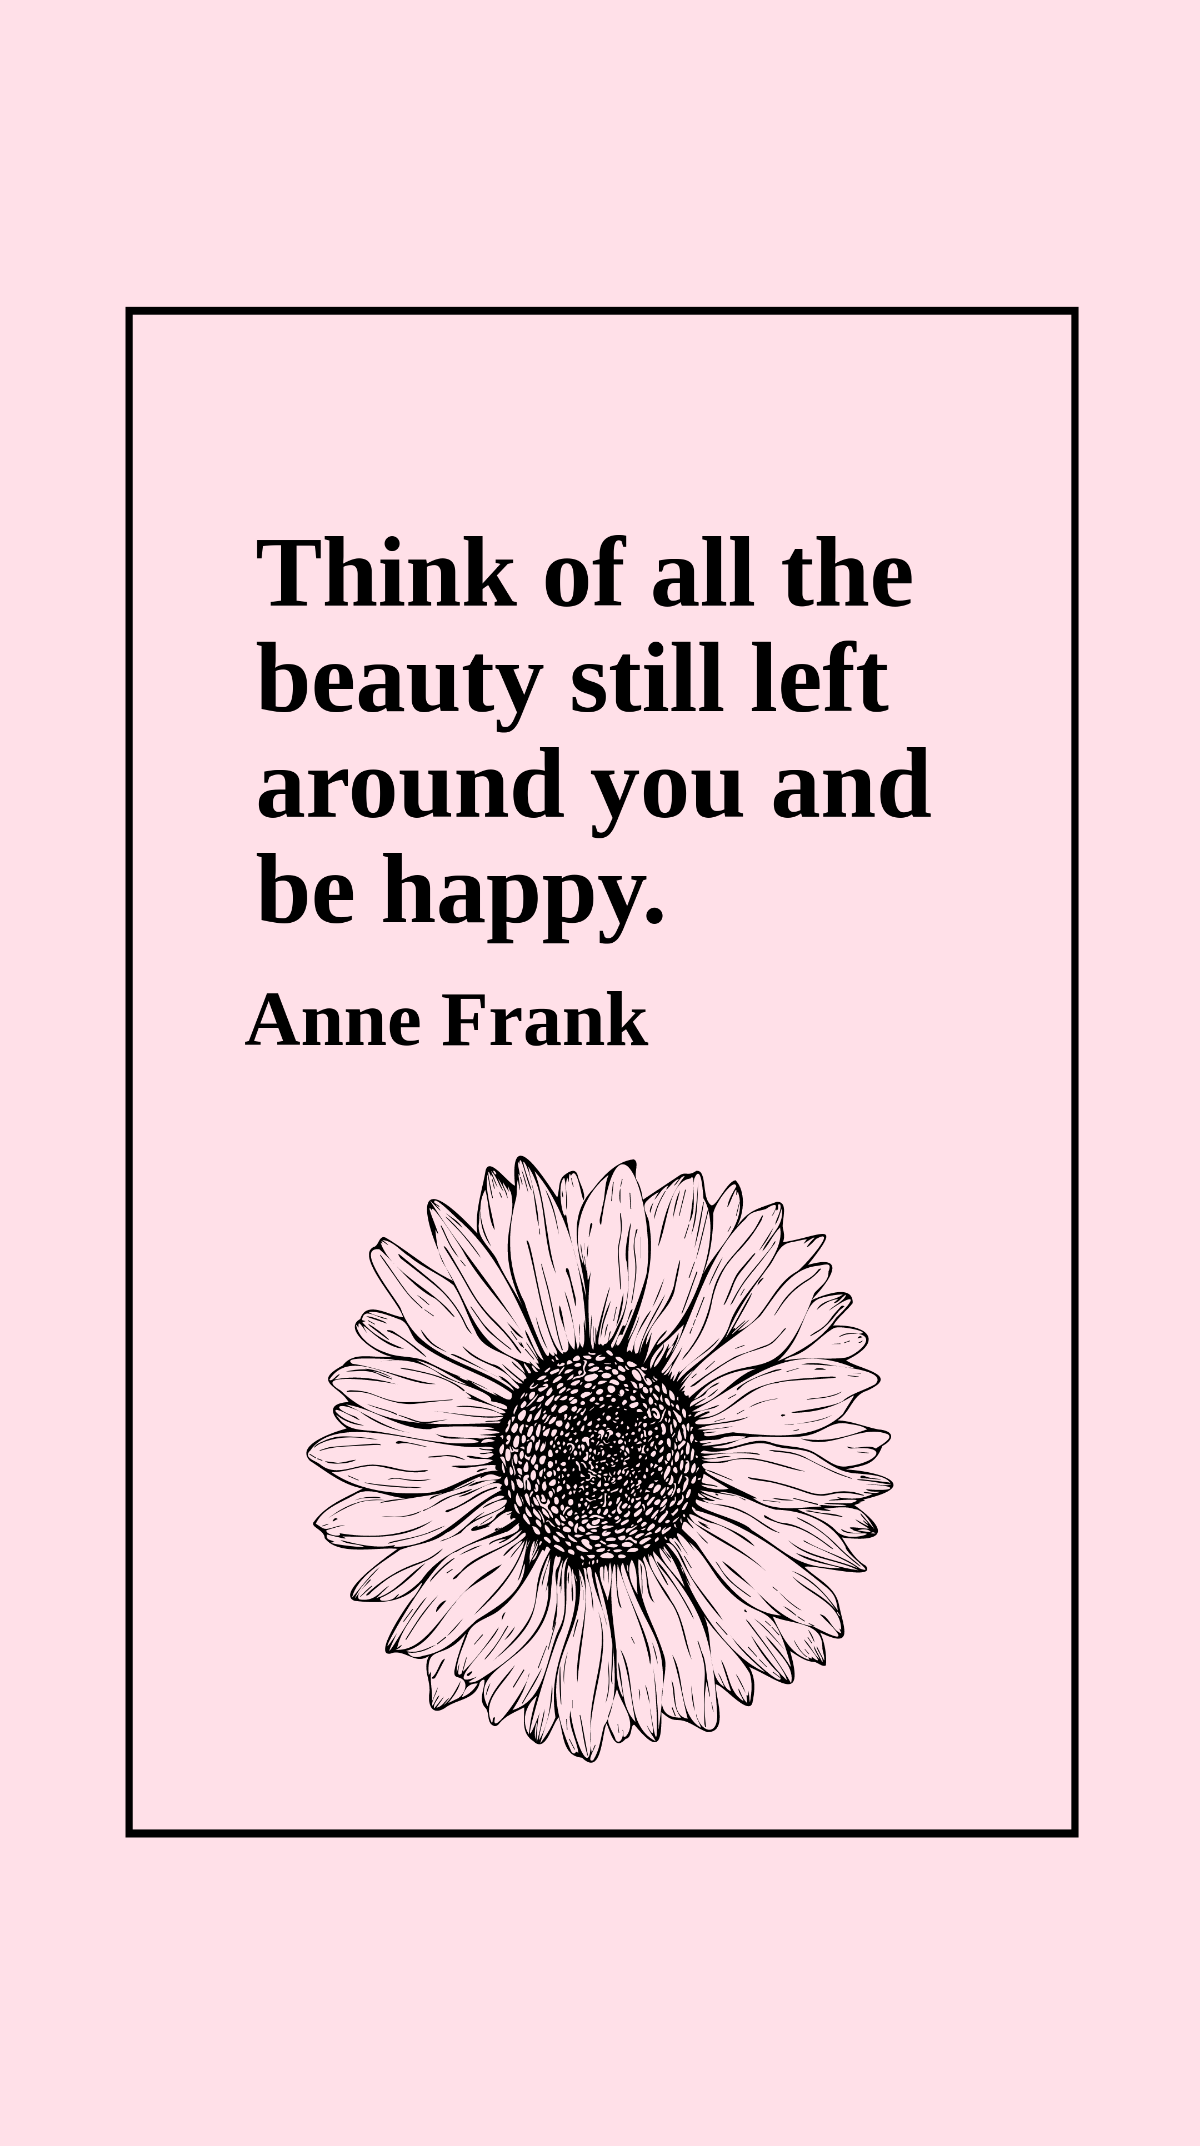 Free Anne Frank - Think of all the beauty still left around you and be happy. Template